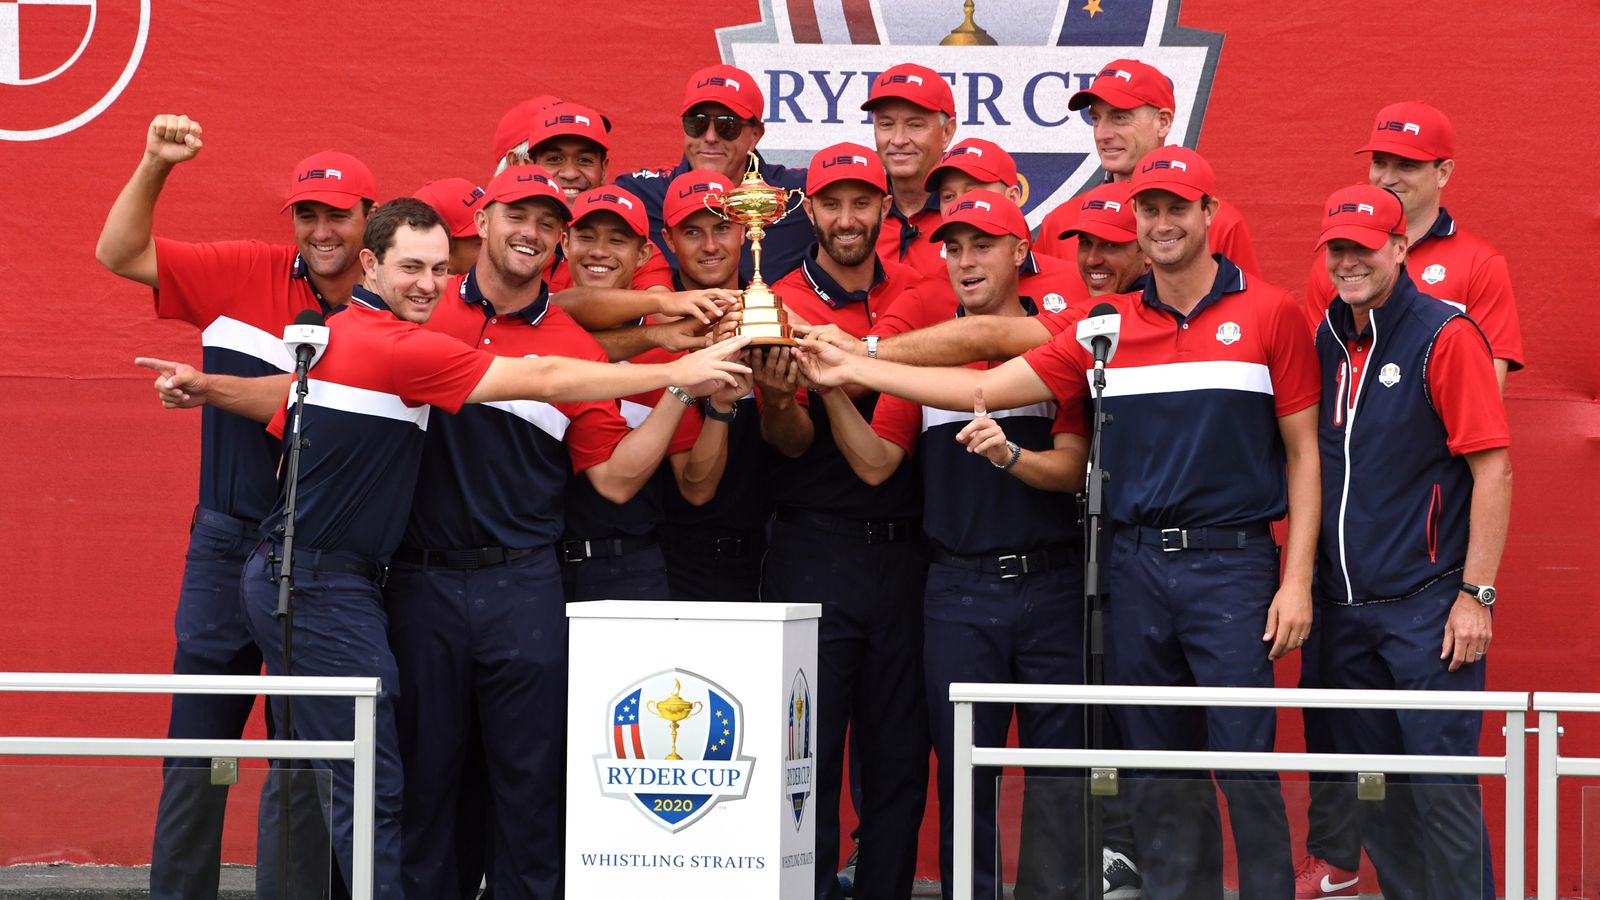 Ryder Cup 2020 Why Team USA's recordbreaking winners were the most